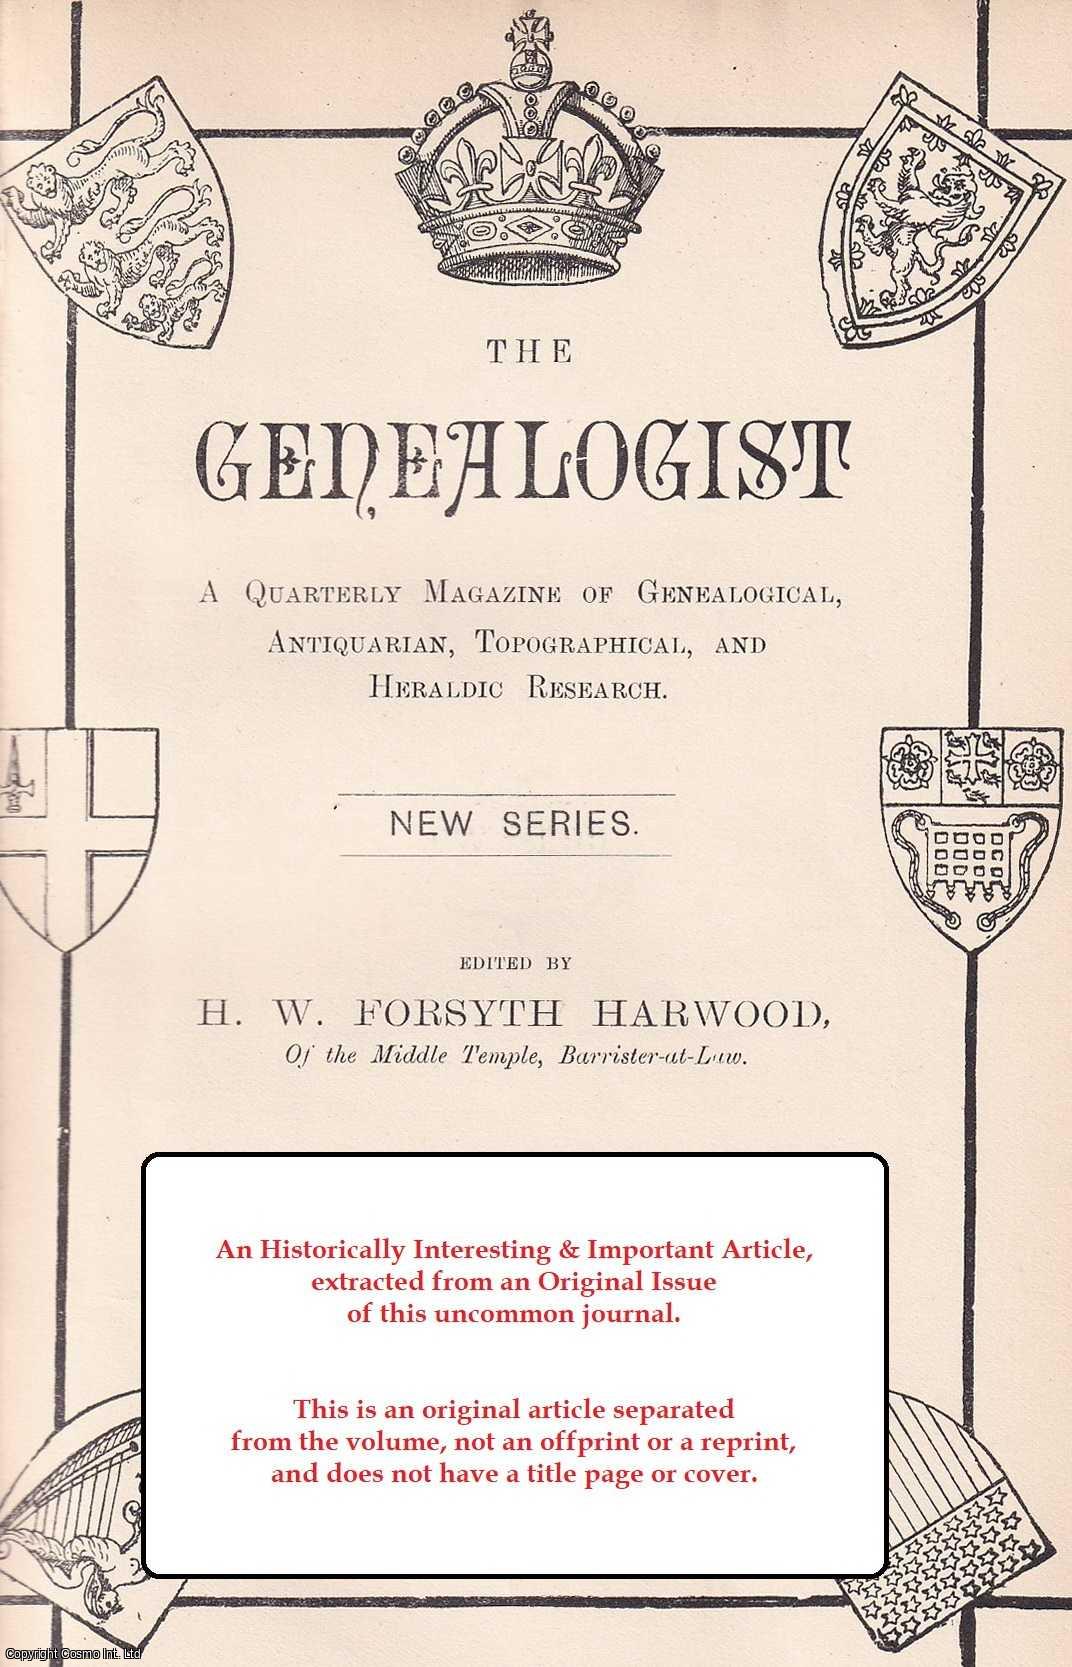 W. H. B. B. - The Mascy and Lathom Pedigrees. An original article from The Genealogist, 1899.